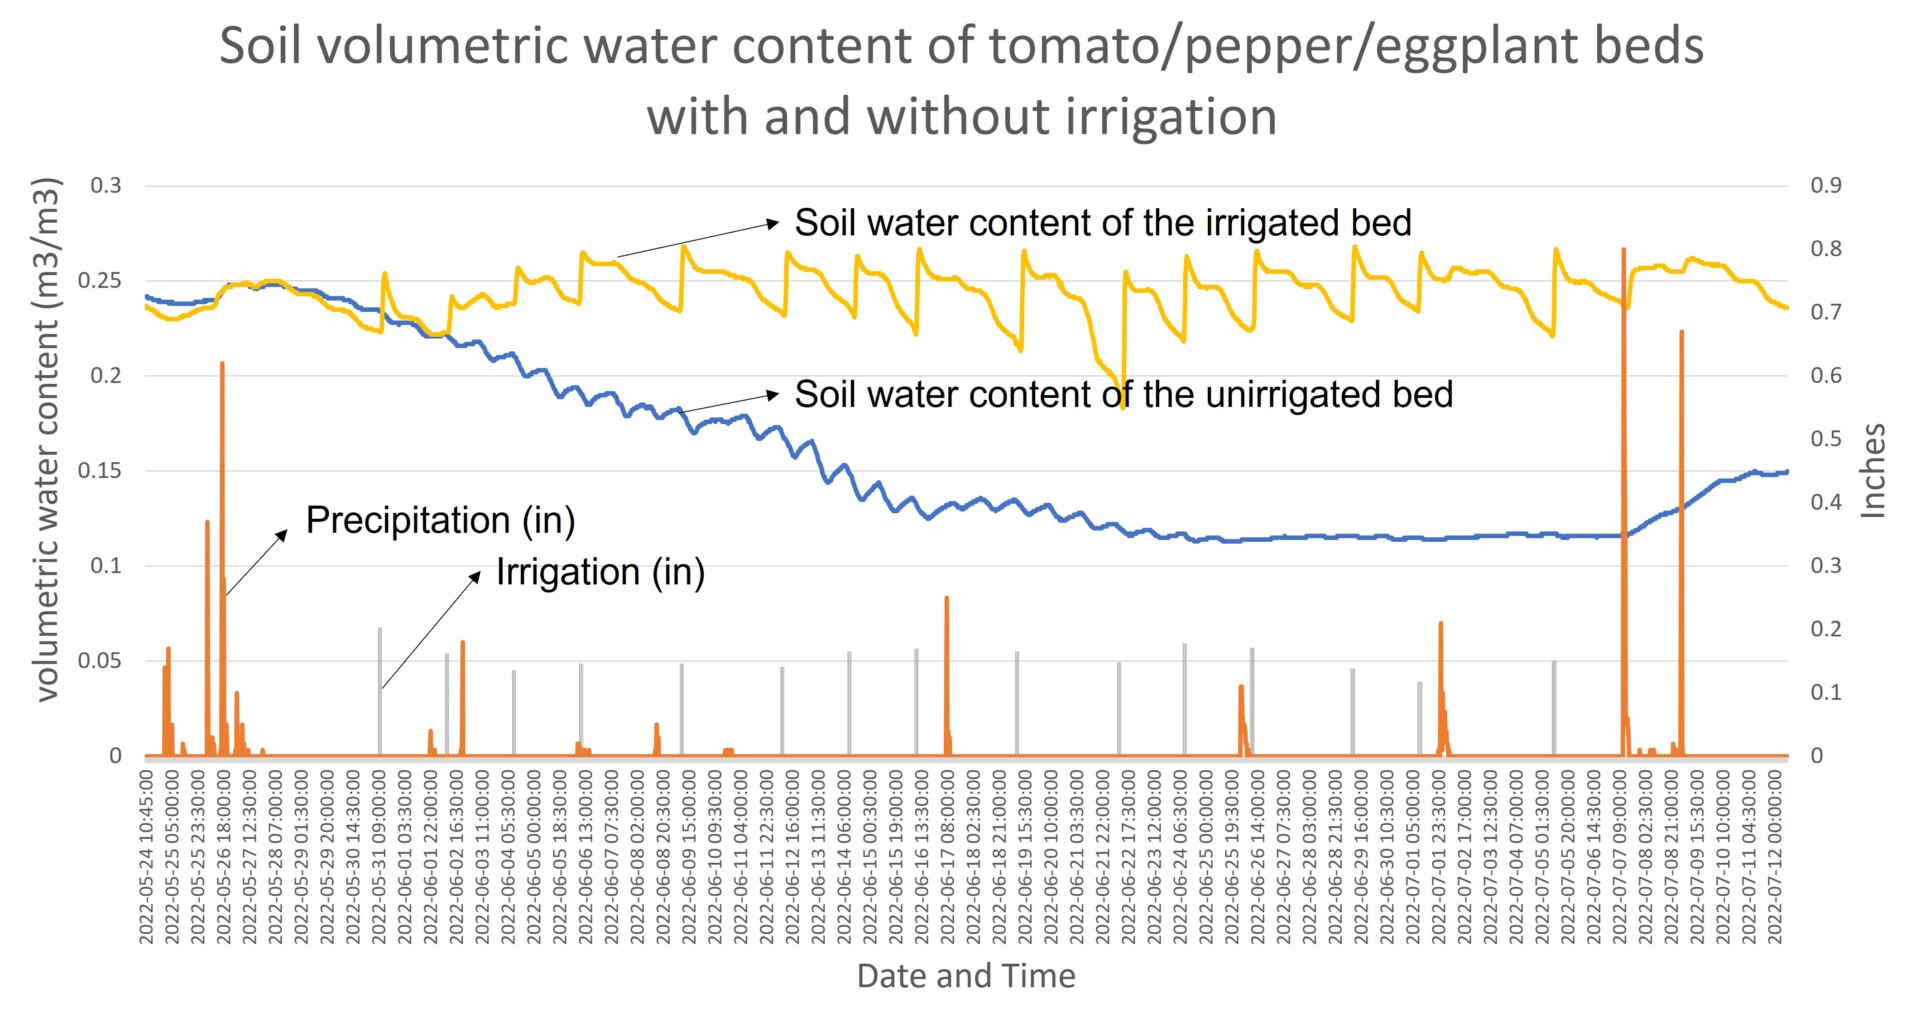 Figure 2. Soil volumetric water content of tomato/pepper/eggplant beds with and without irrigation